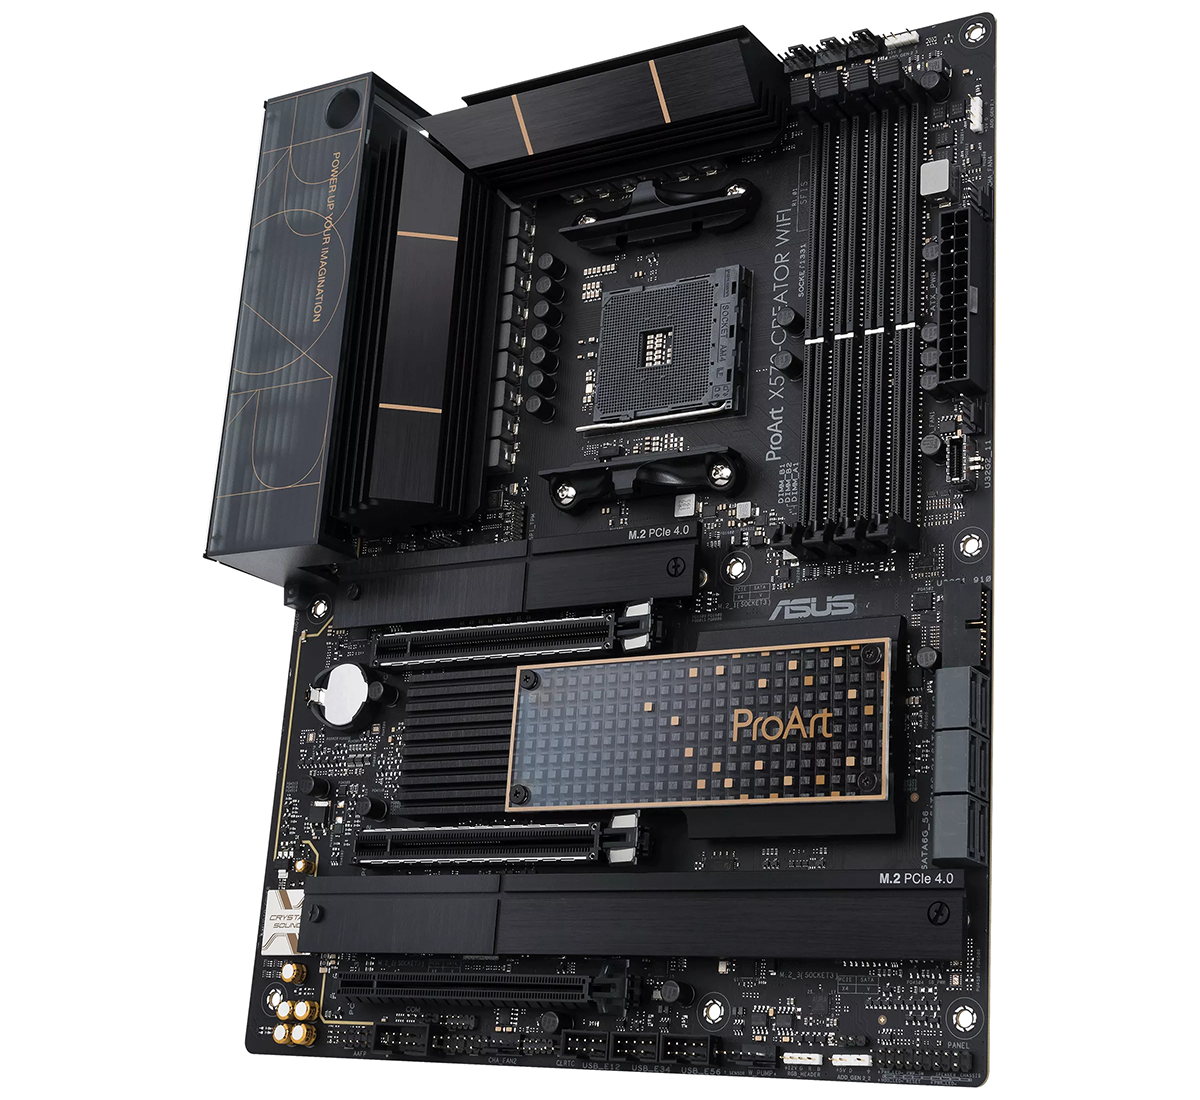 ASUS X570 Creator motherboard with the X570 chipset and AM4 socket for the latest AMD Ryzen CPUs.